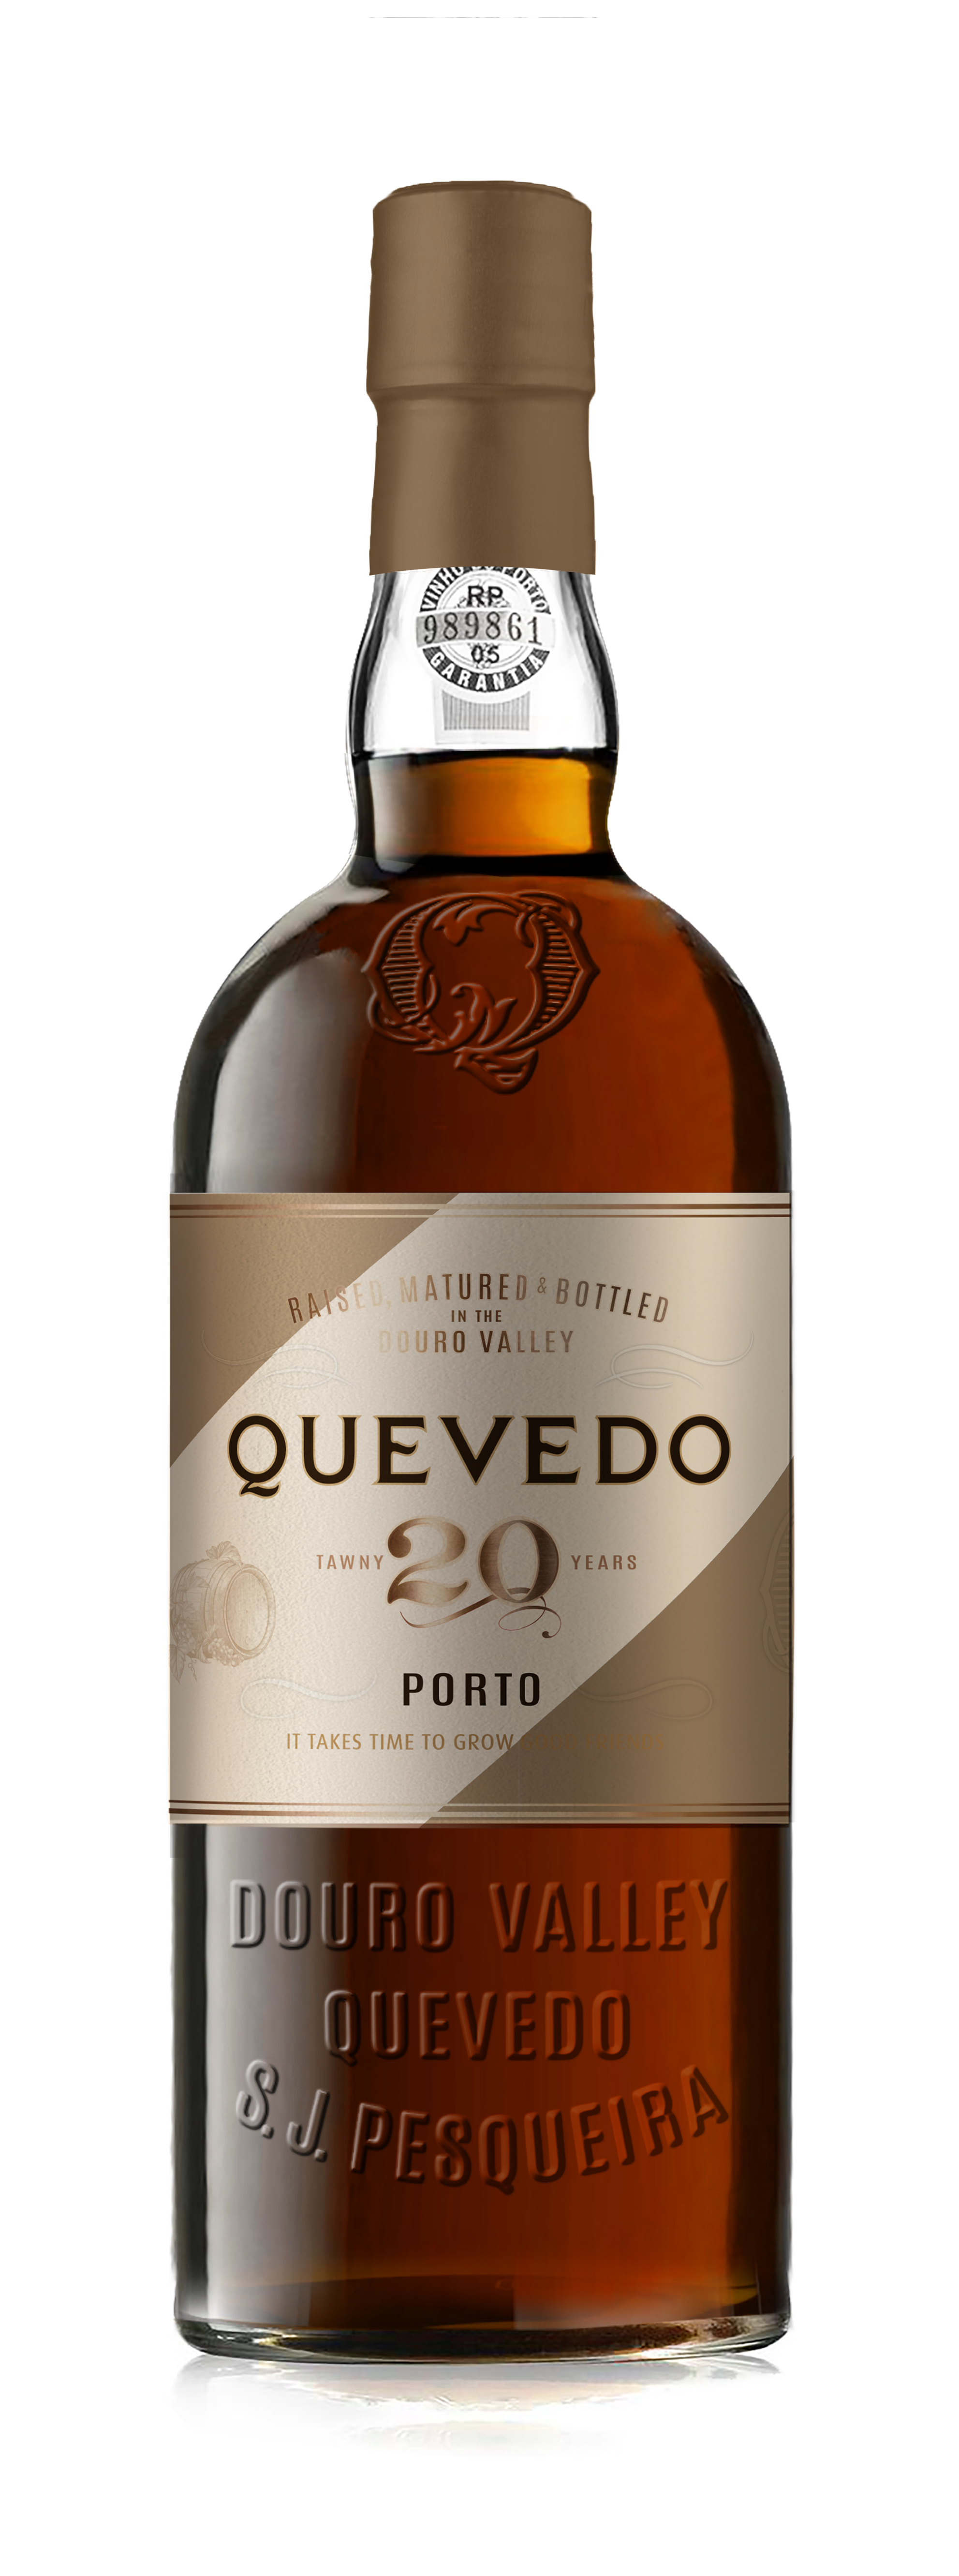  Quevedo 20 Year Old Tawny Port 0,75l Flasche